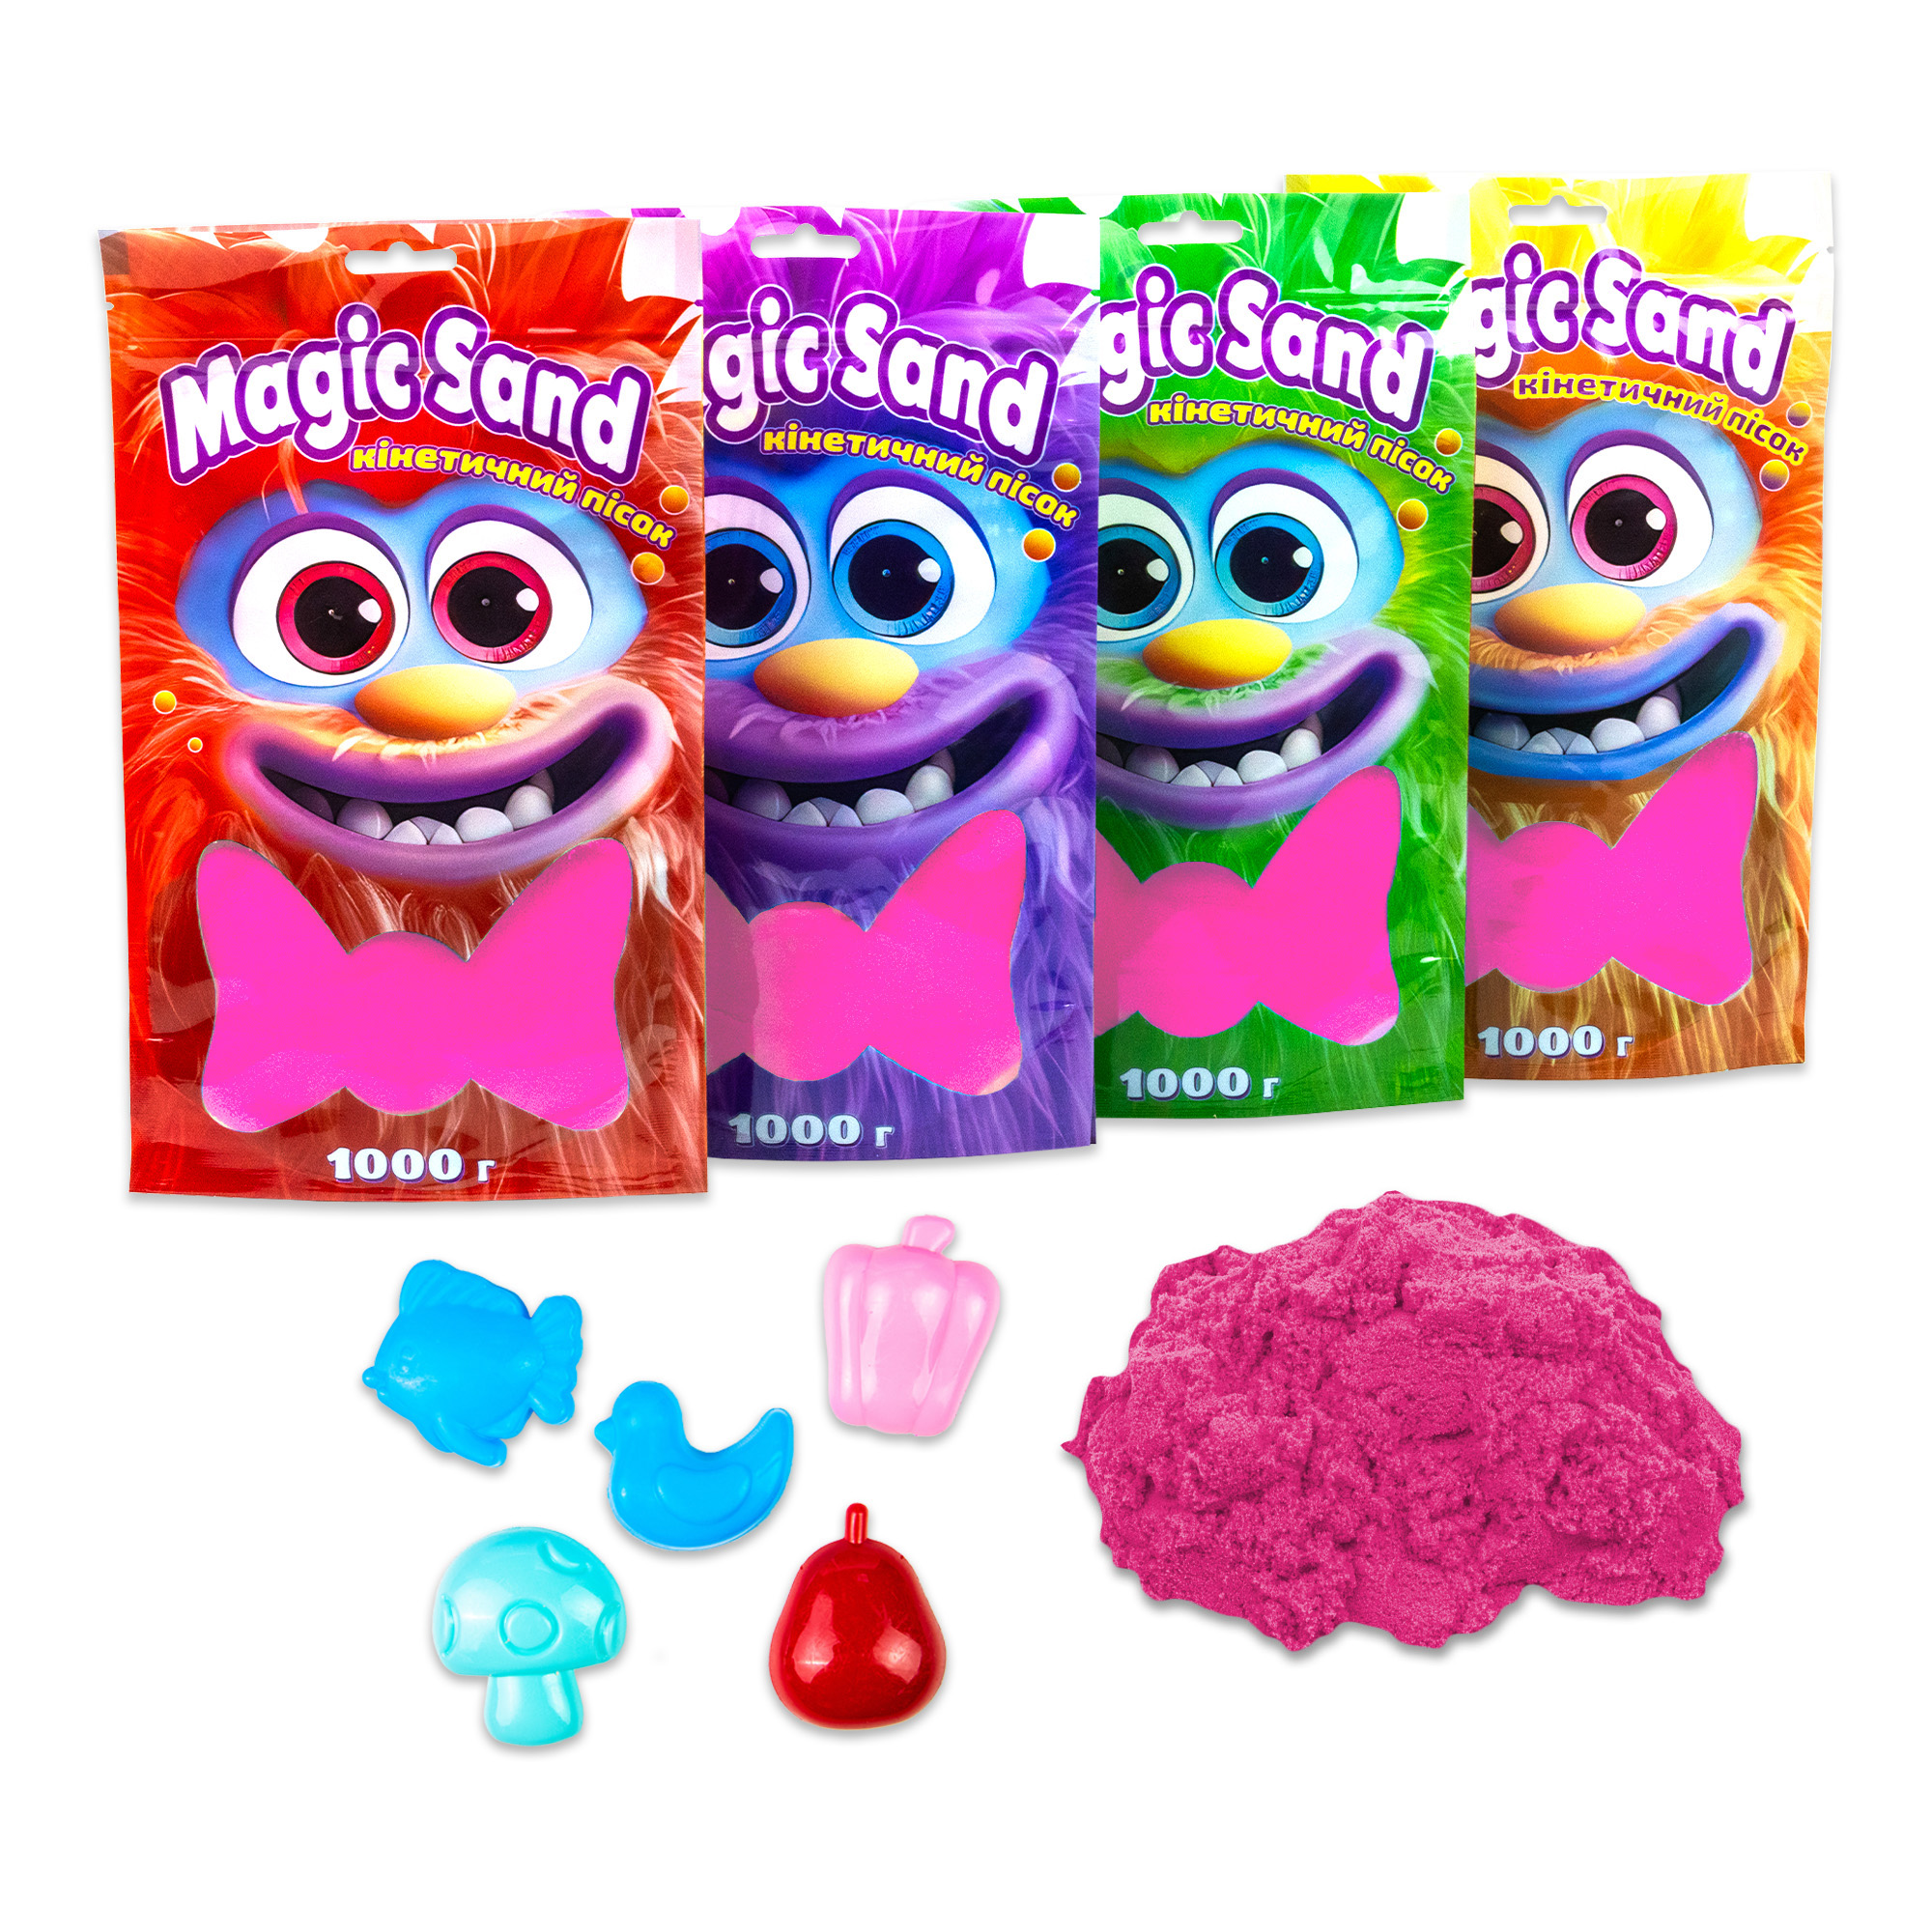 Kinetic sand Strateg Magic sand in a package 39404-8 pink, 1 kg